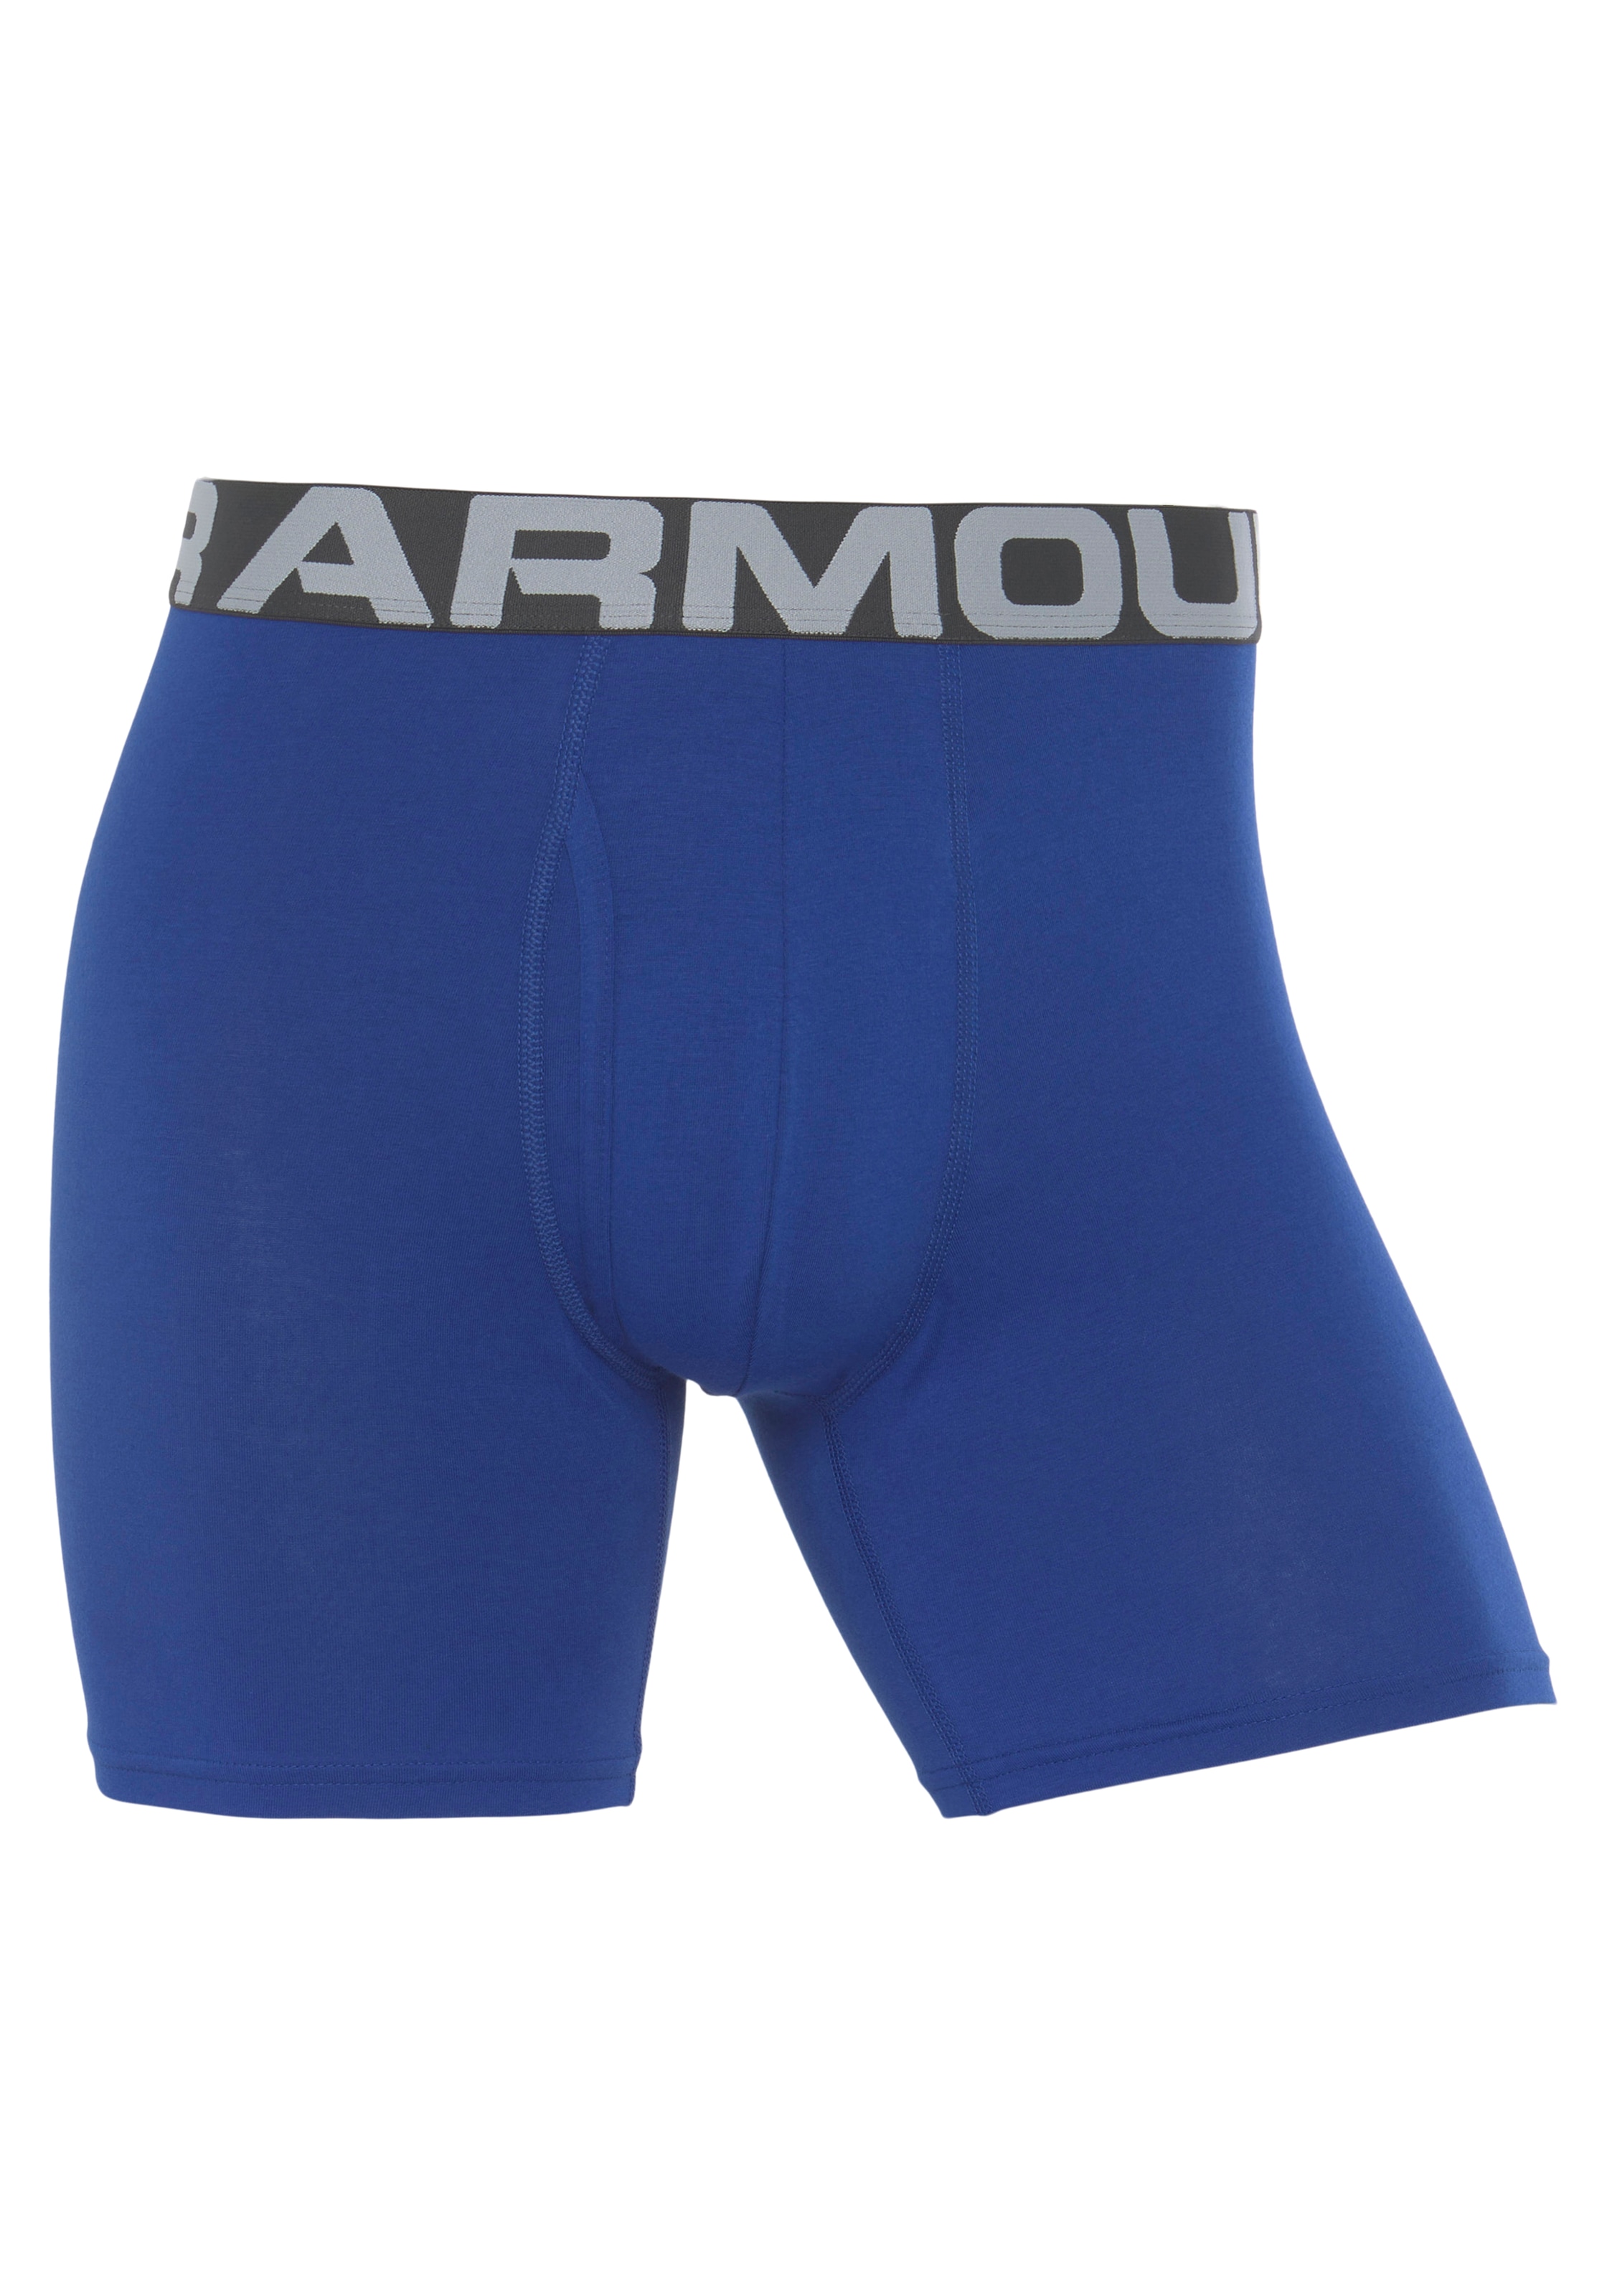 Under Armour® Boxershorts »CHARGED COTTON 6 in 1 PACK«, (Packung, 3 St., 3er-Pack)